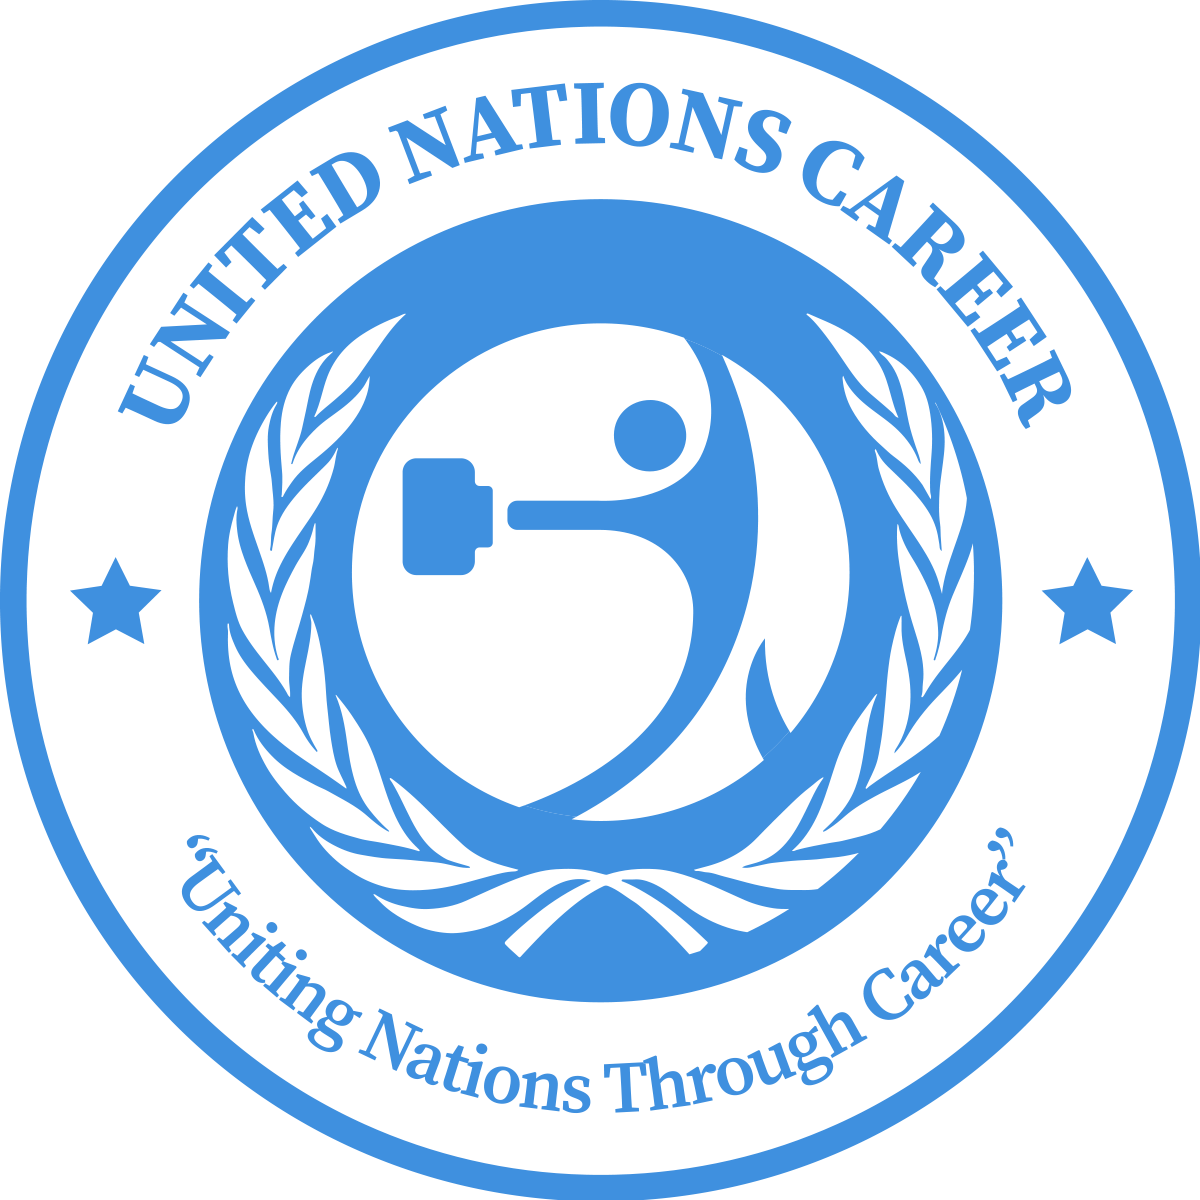 United Nations Career